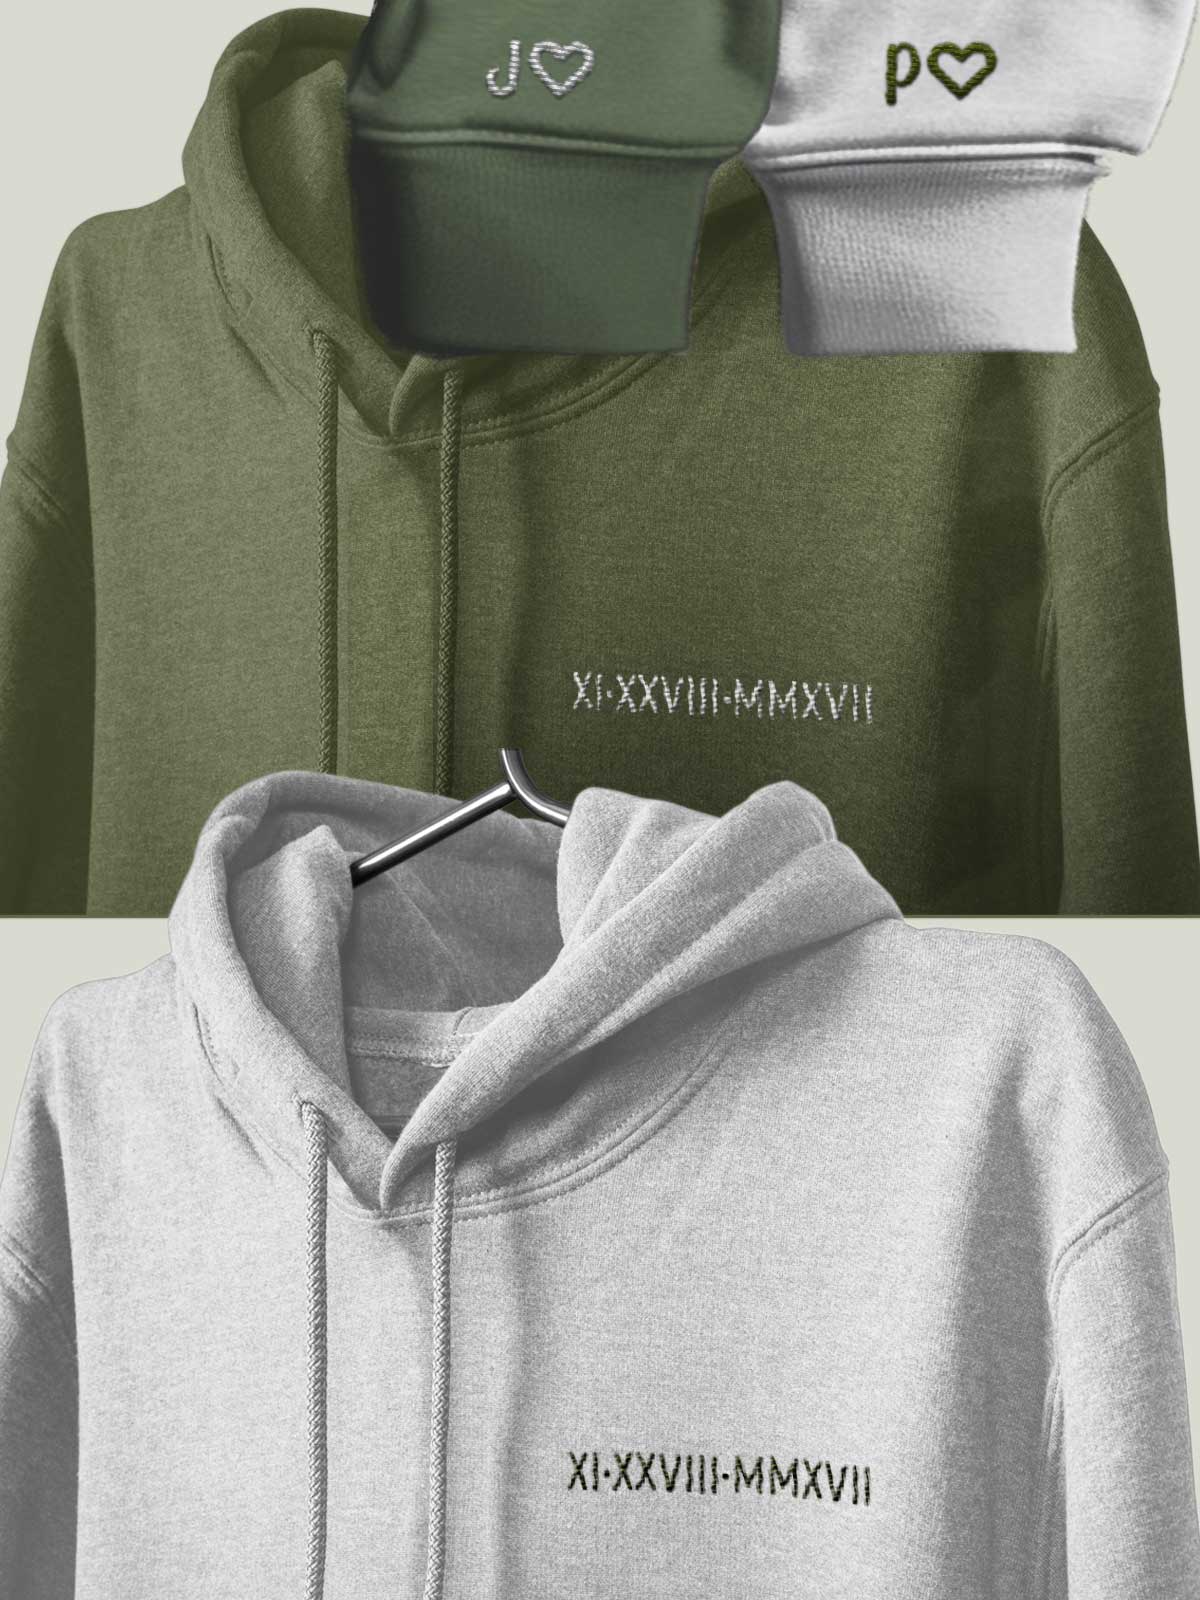 Custom Embroidered Hoodie with Dates in Roman Numerals and Custom Text